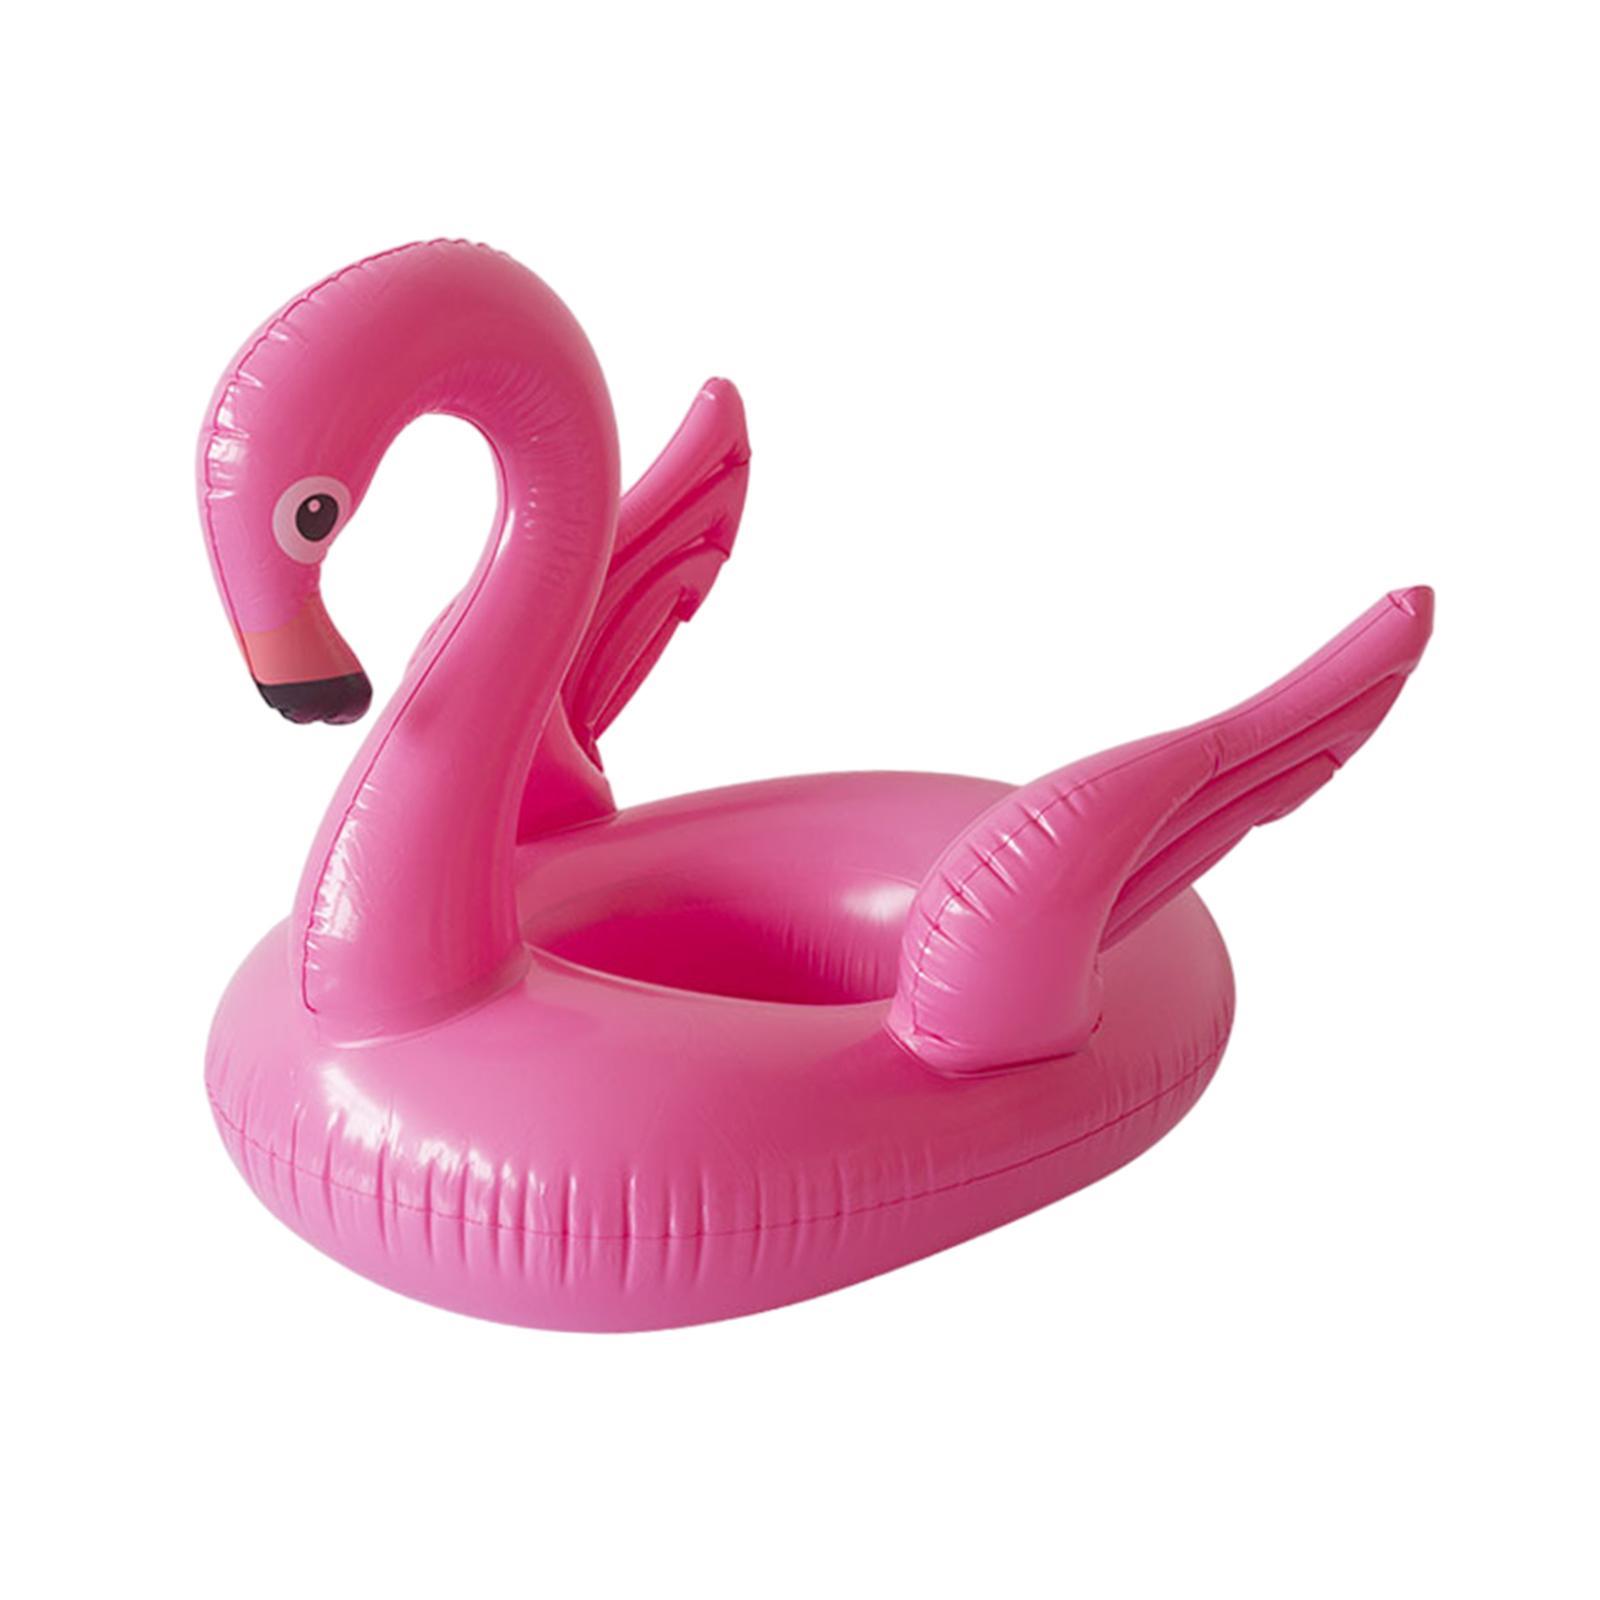 Kids Swimming Pool Floats Cute with Seat Swimming Rings for Children Child Summer - Flamingo